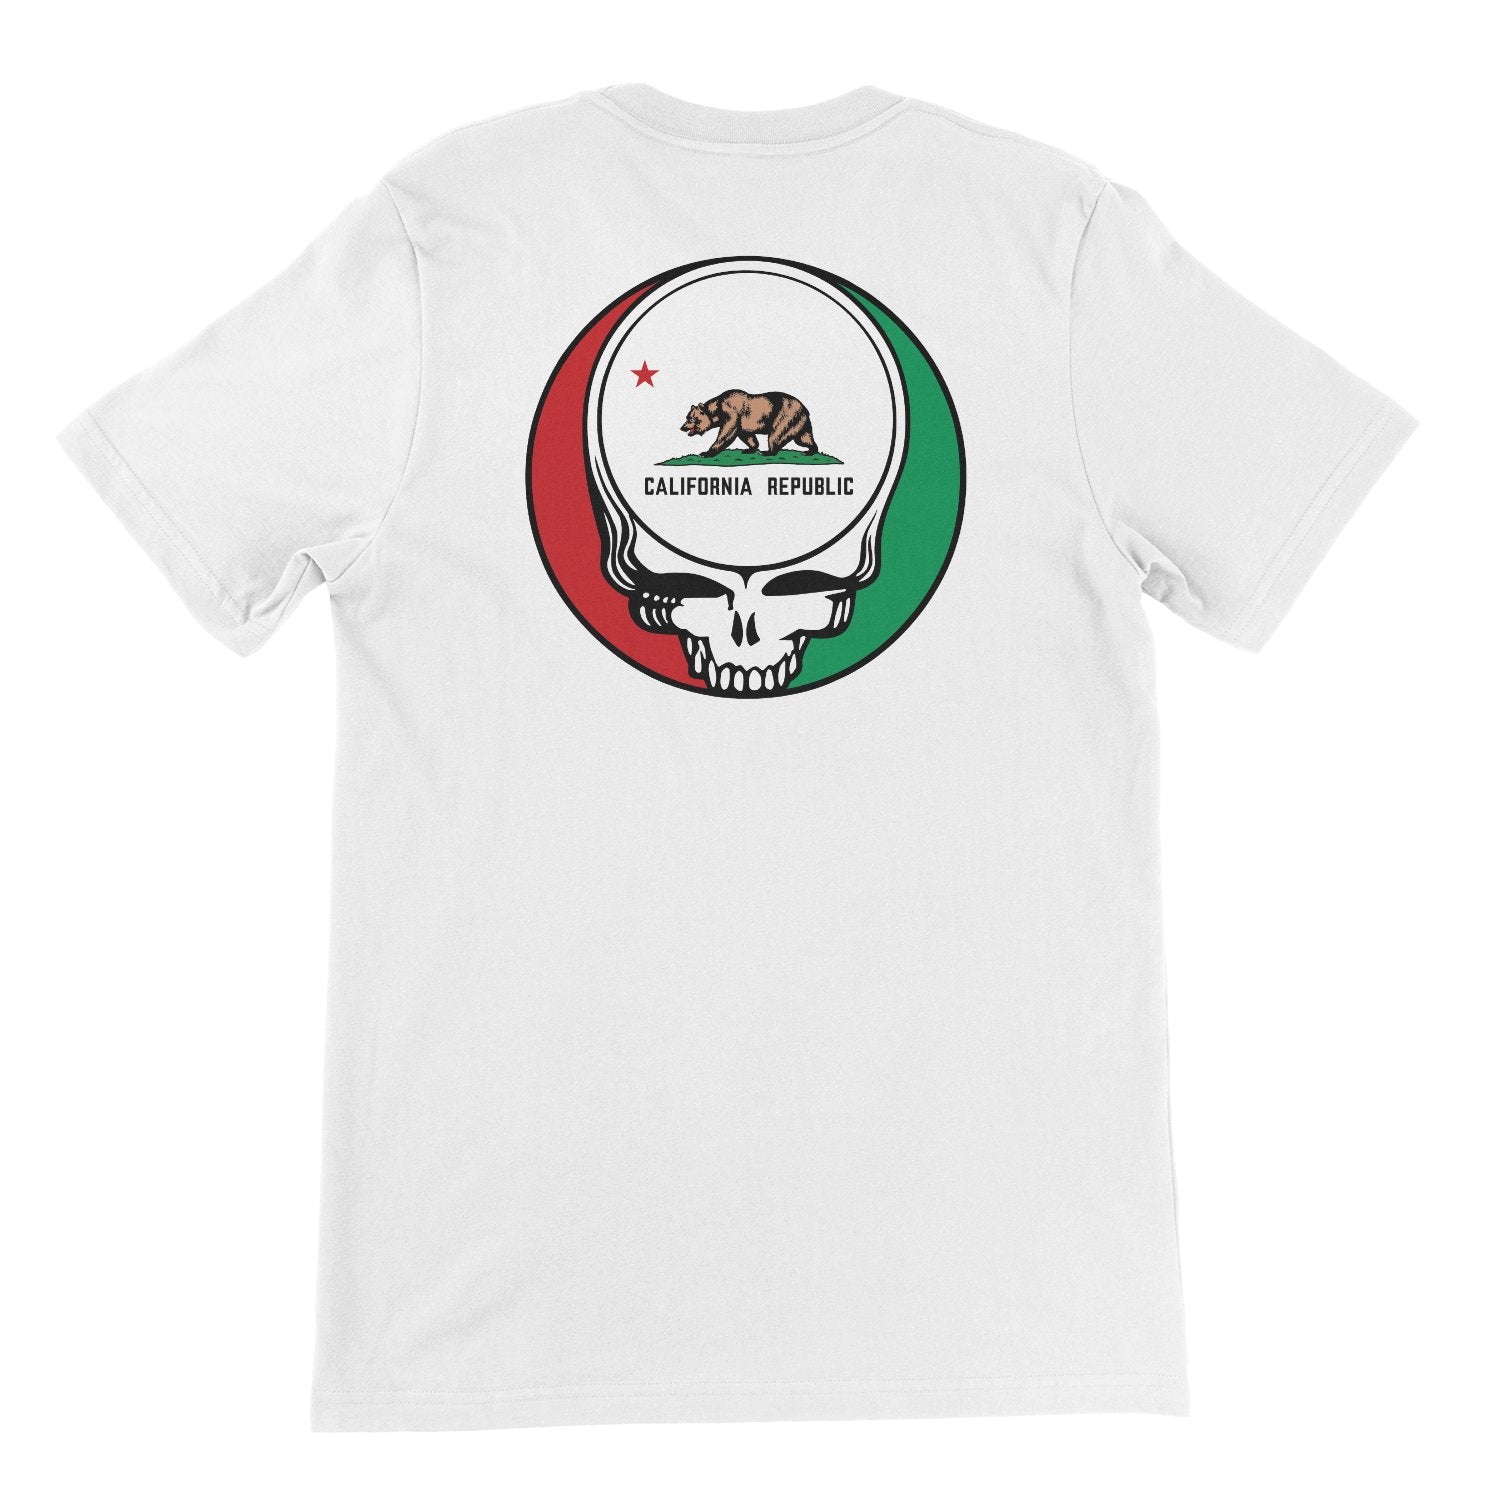 Grateful Dead x TGR California Steal Your State Tee - Teton Gravity Research